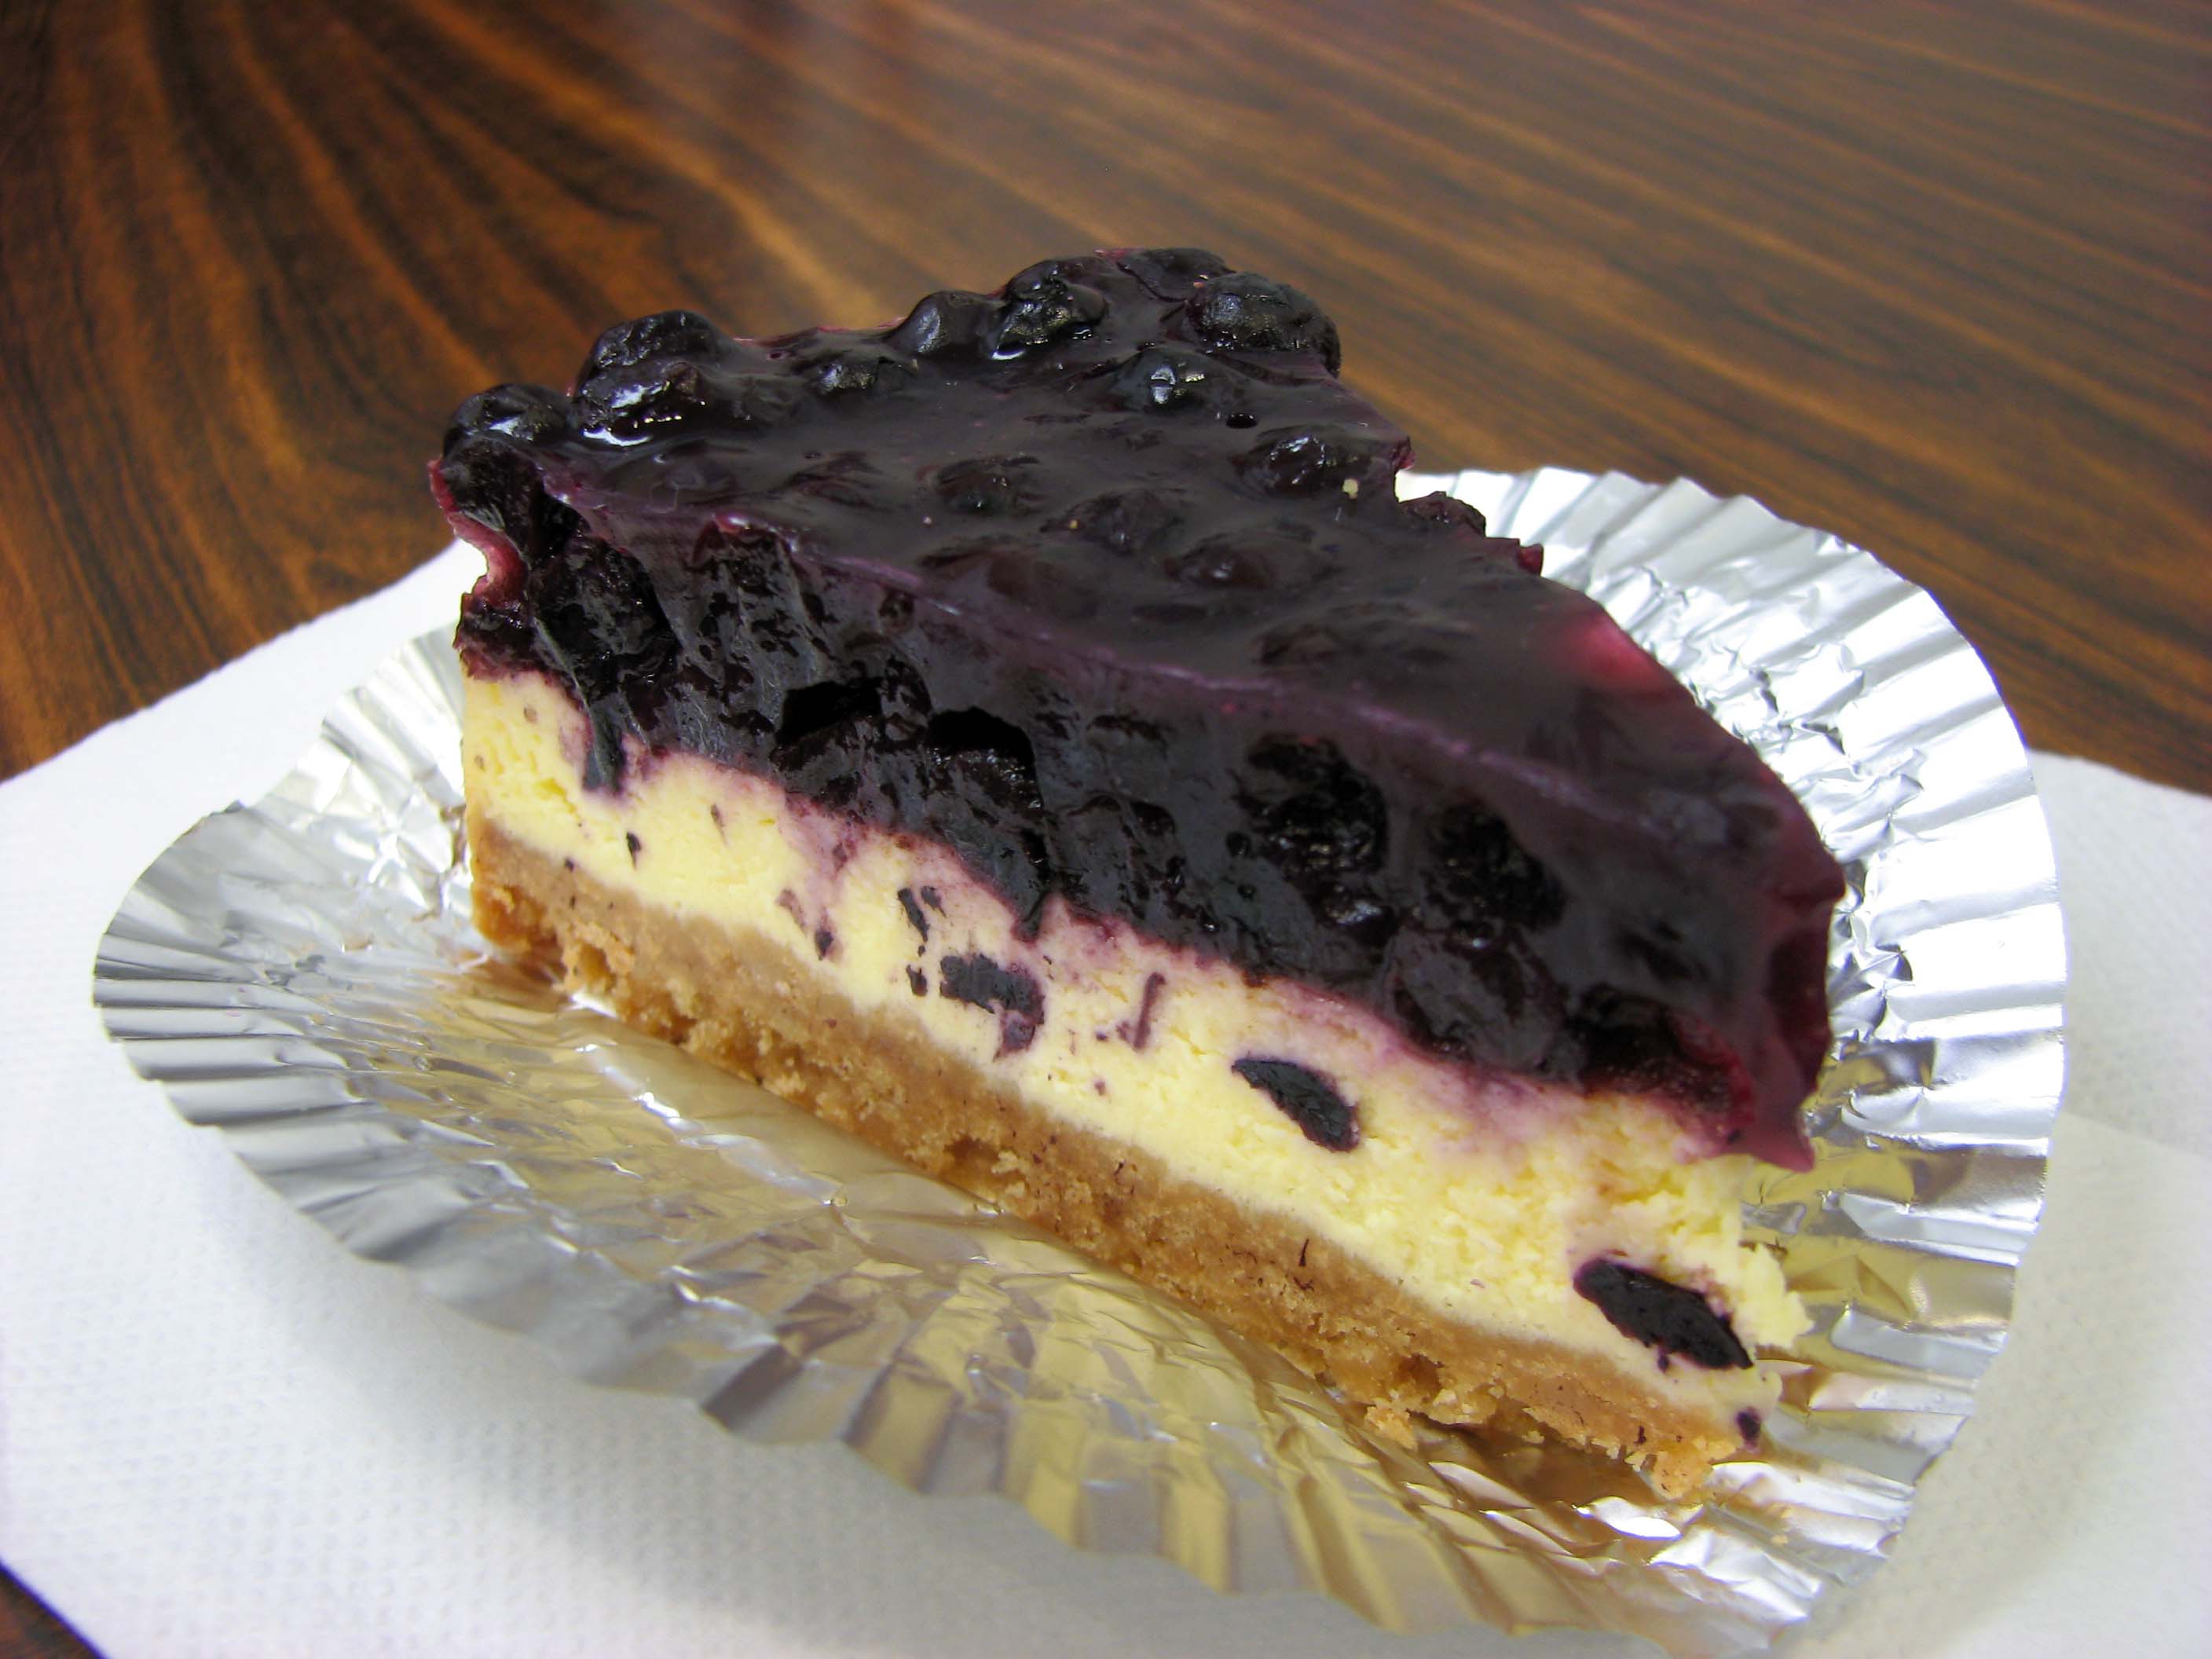 Cheesecake with blueberry topping